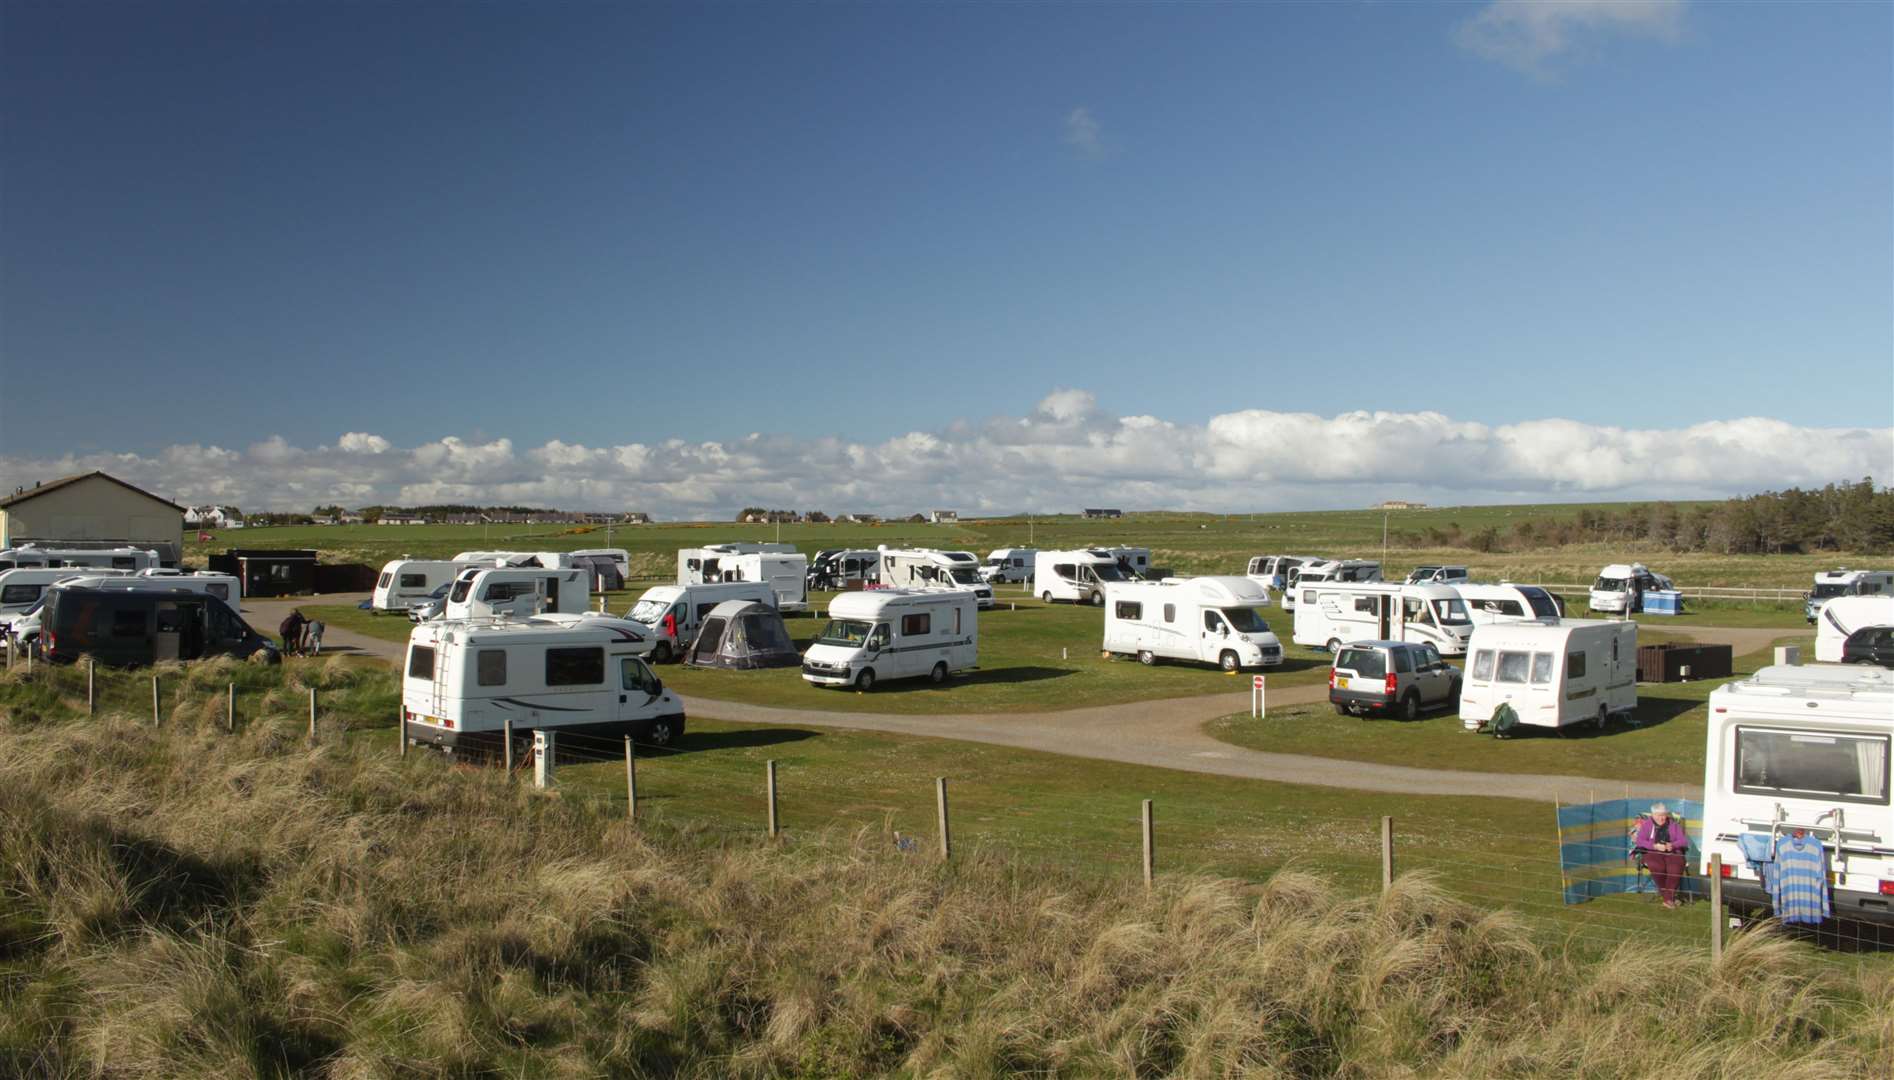 Dunnet Bay caravan site, on the North Coast 500 route, busy with motorhomes and caravans in May this year. Picture: Alan Hendry